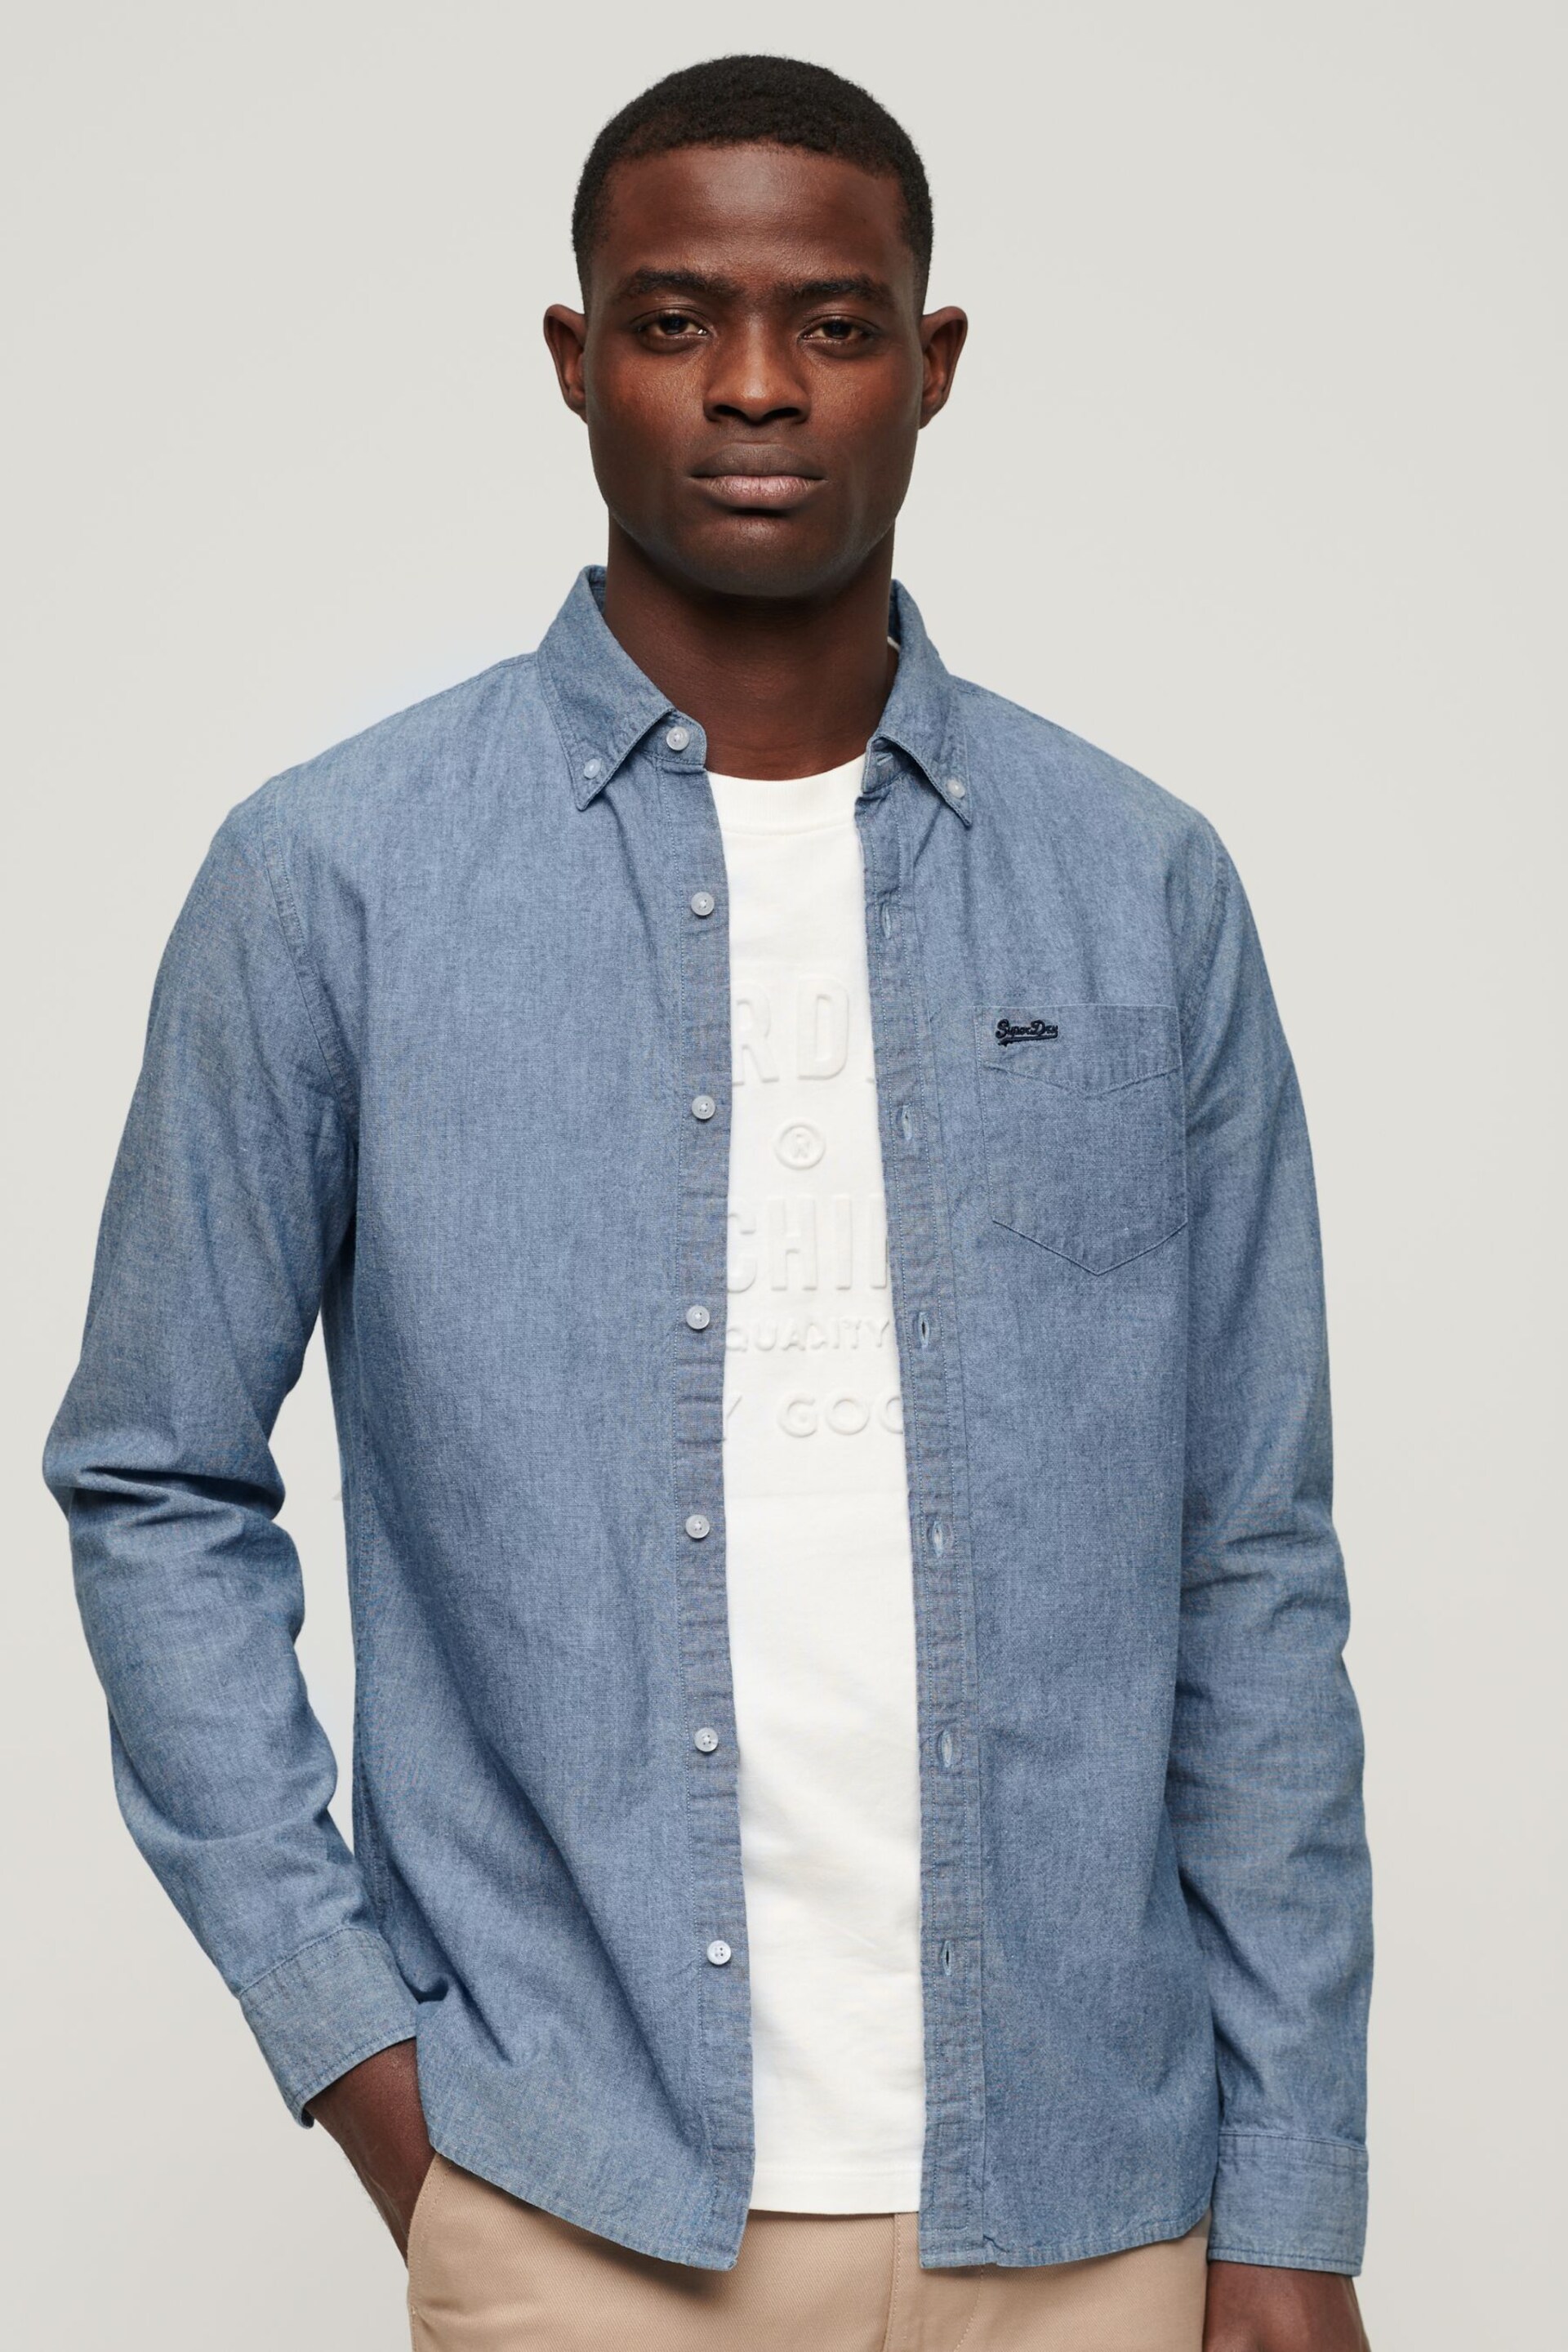 Superdry Blue Cotton Long Sleeved Oxford Shirt - Image 1 of 4